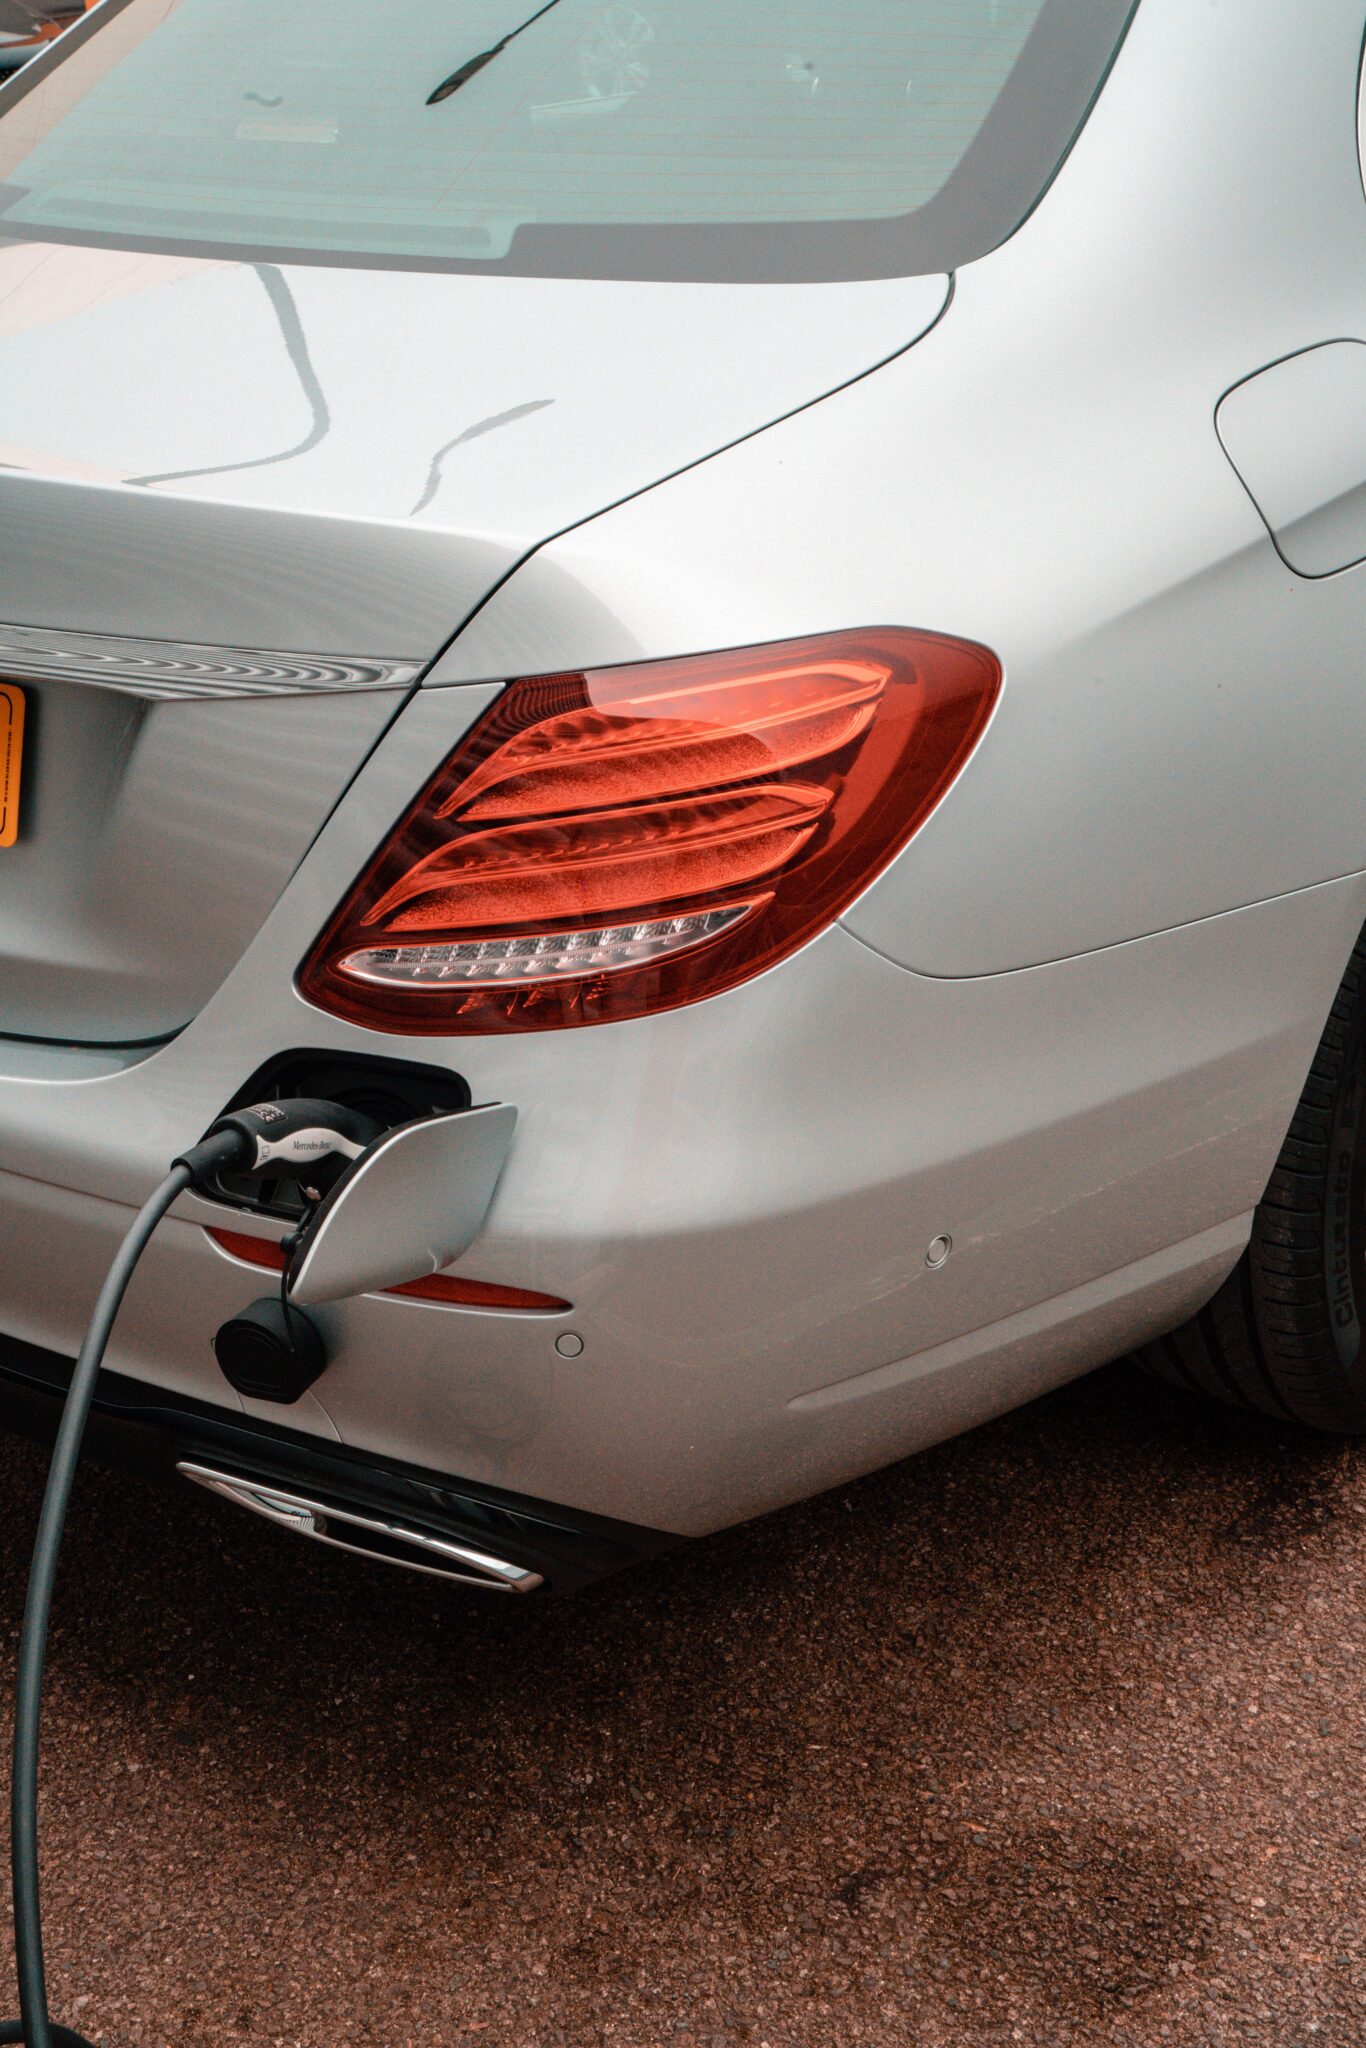 The E 300 de can easily be plugged in